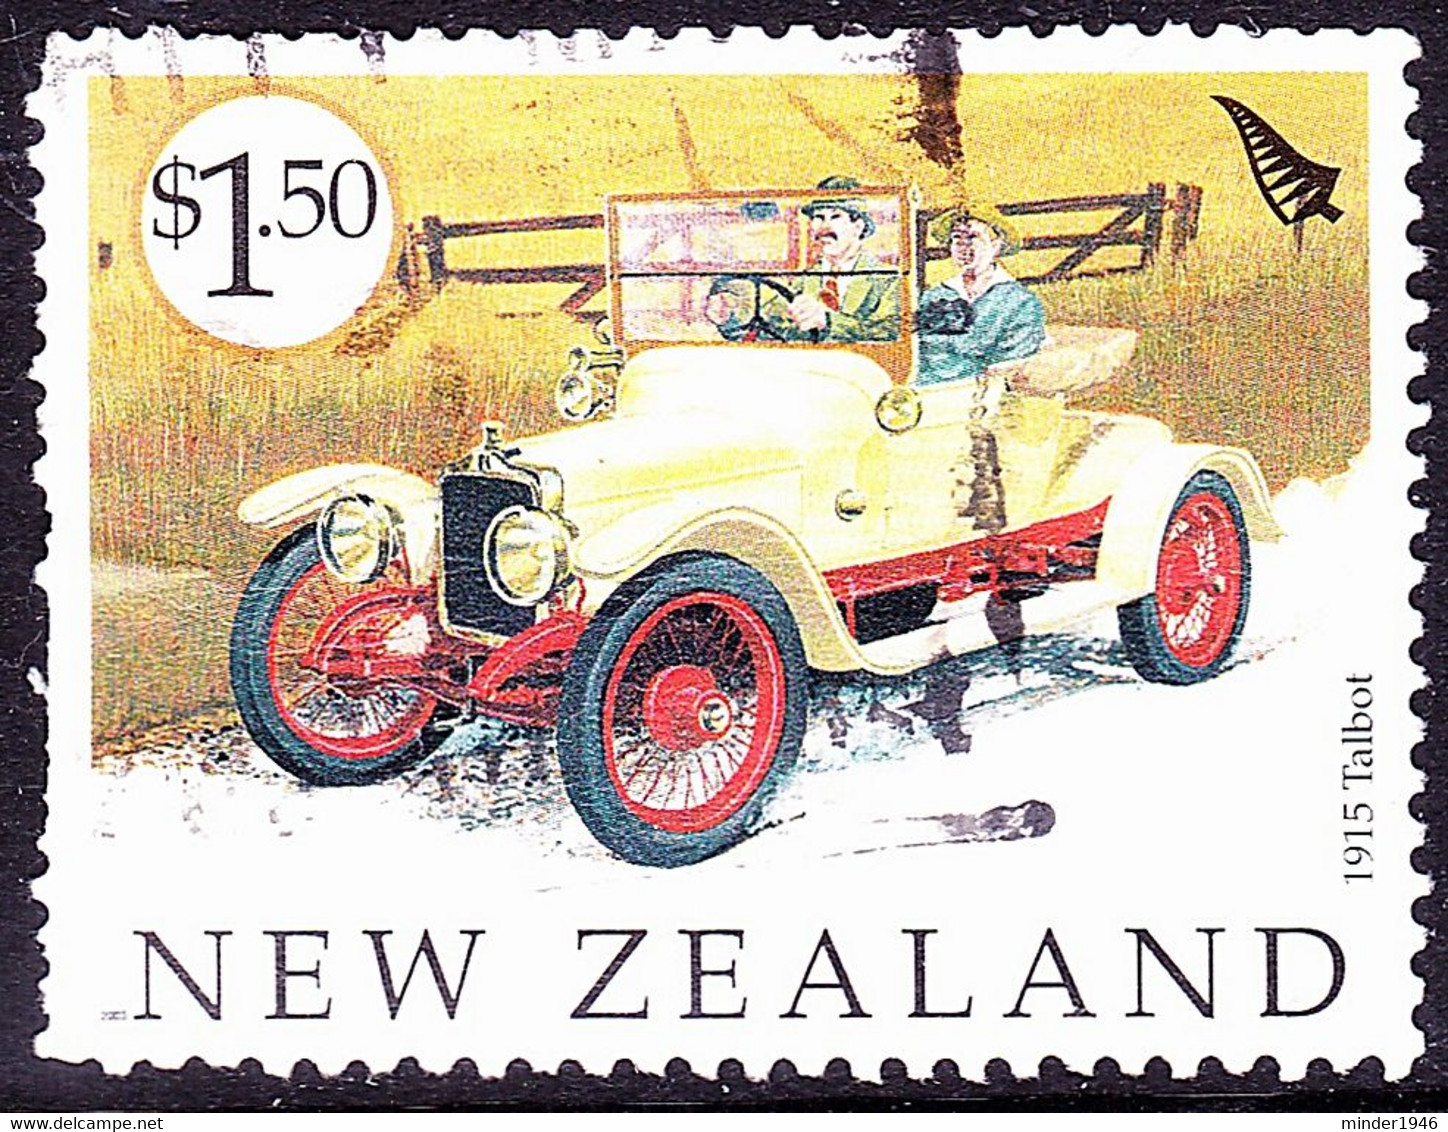 NEW ZEALAND 2003 $1.50 Multicoloured, Veteran Vehicles-1915 Talbot SG2642 Used - Used Stamps